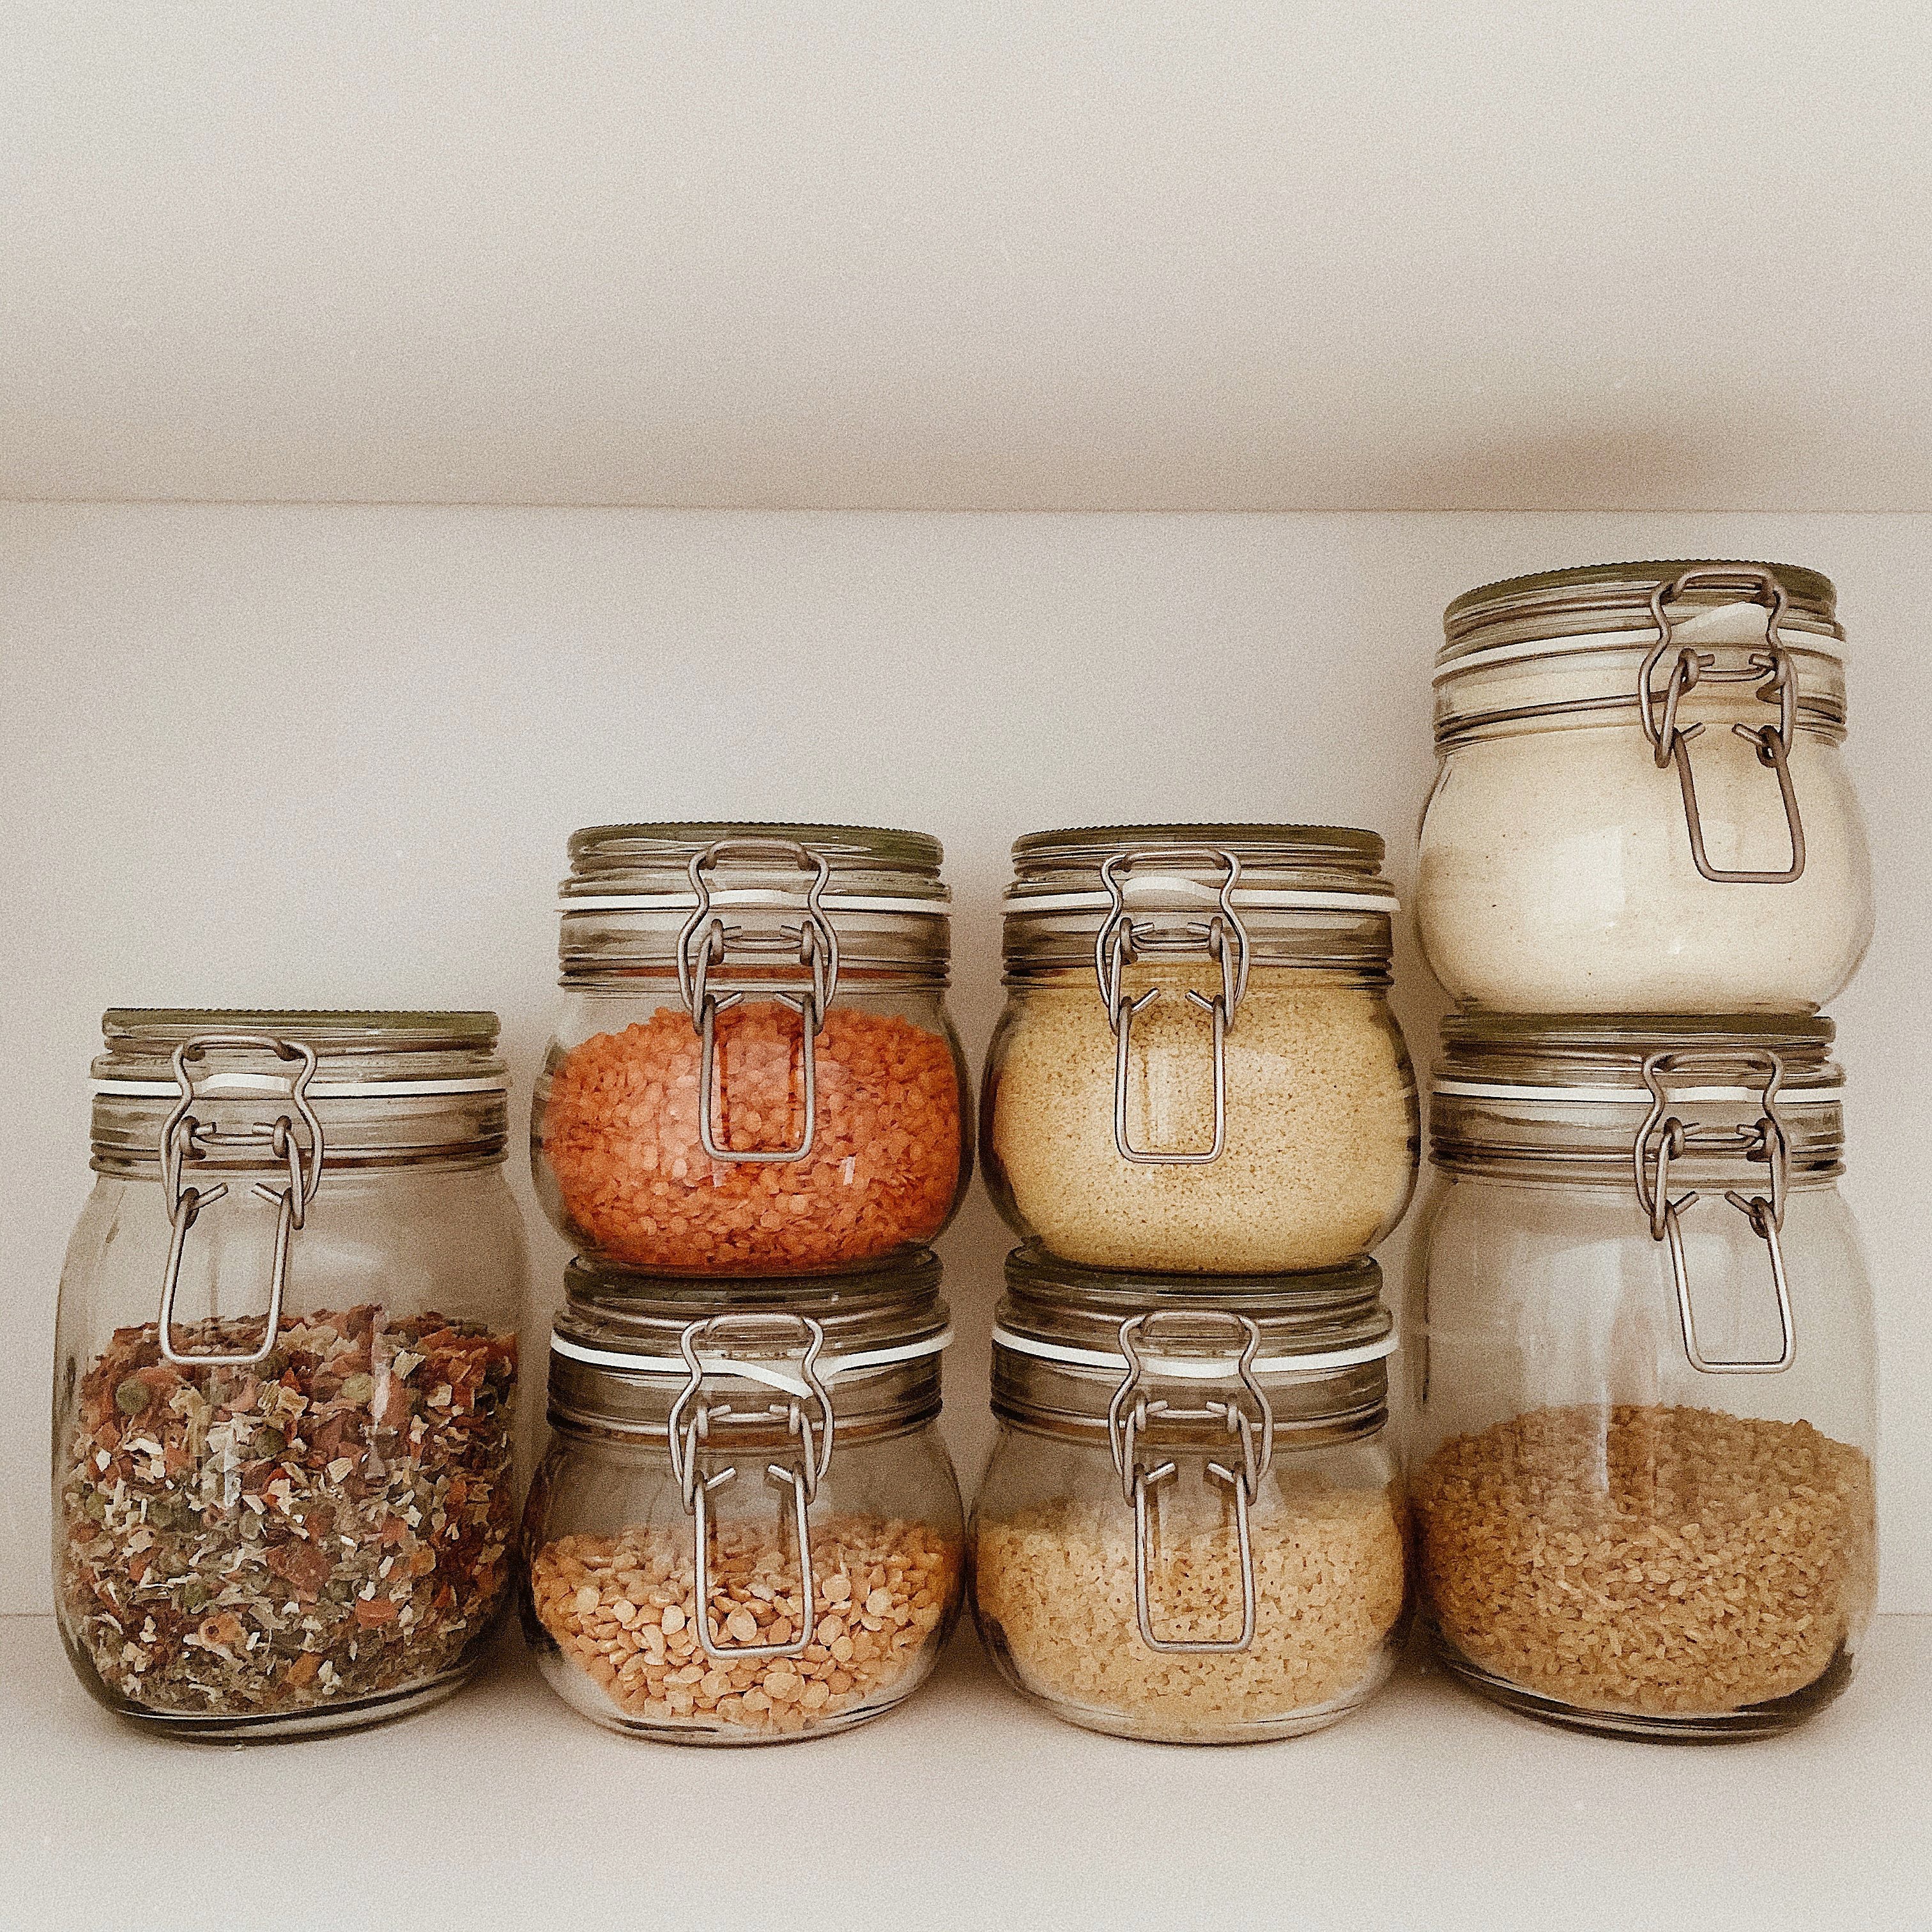 Five of My Pantry Must-Haves